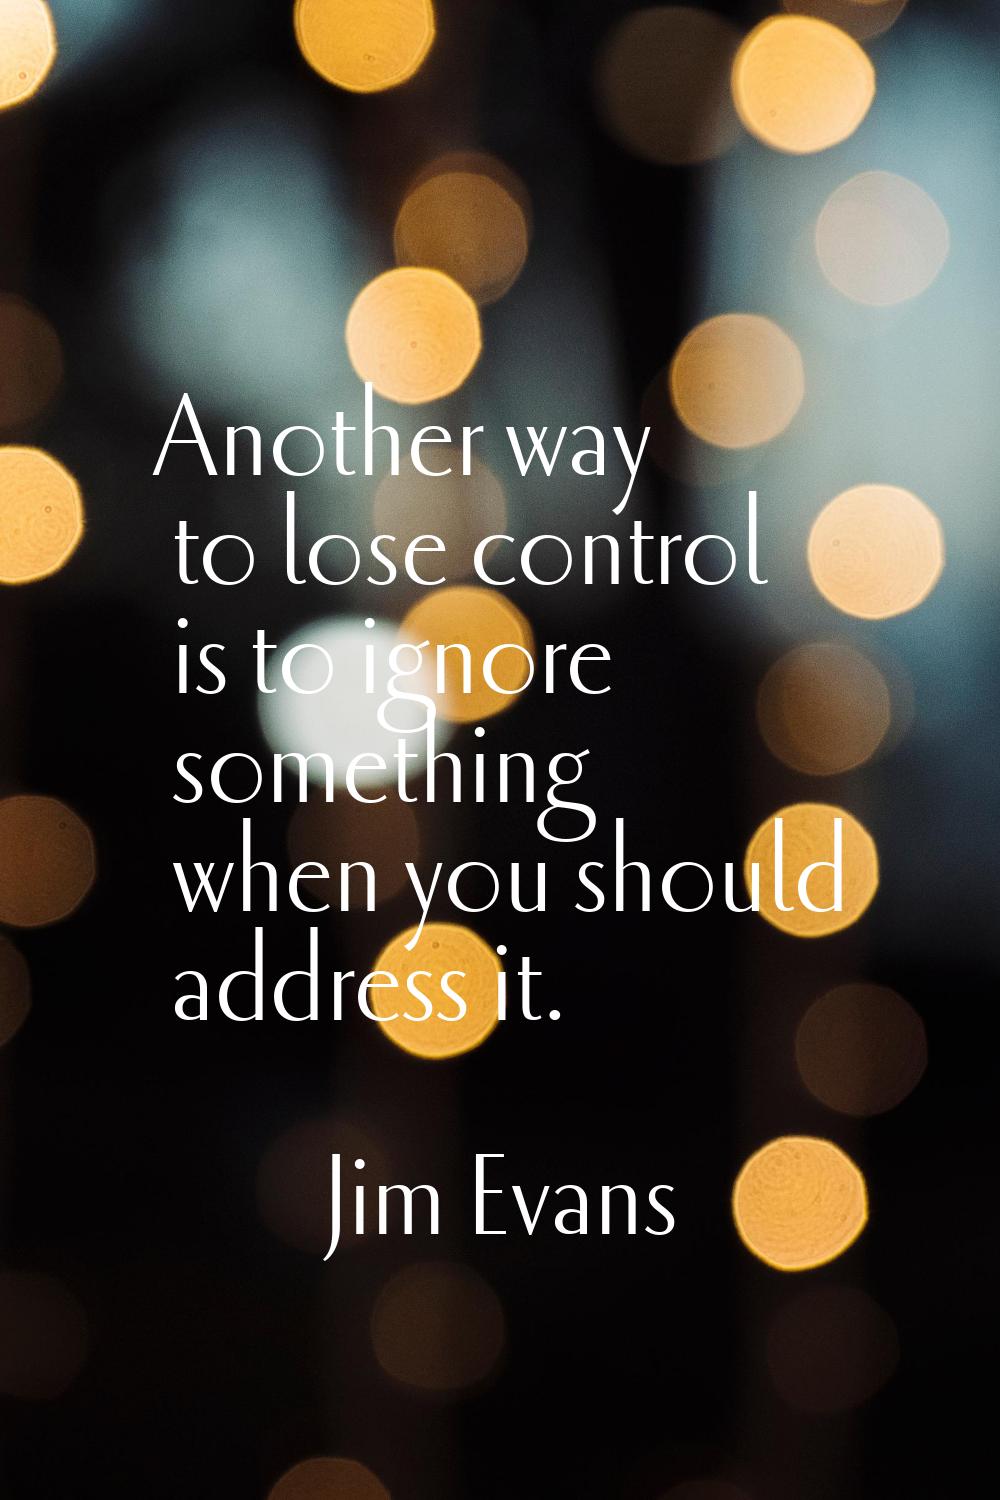 Another way to lose control is to ignore something when you should address it.